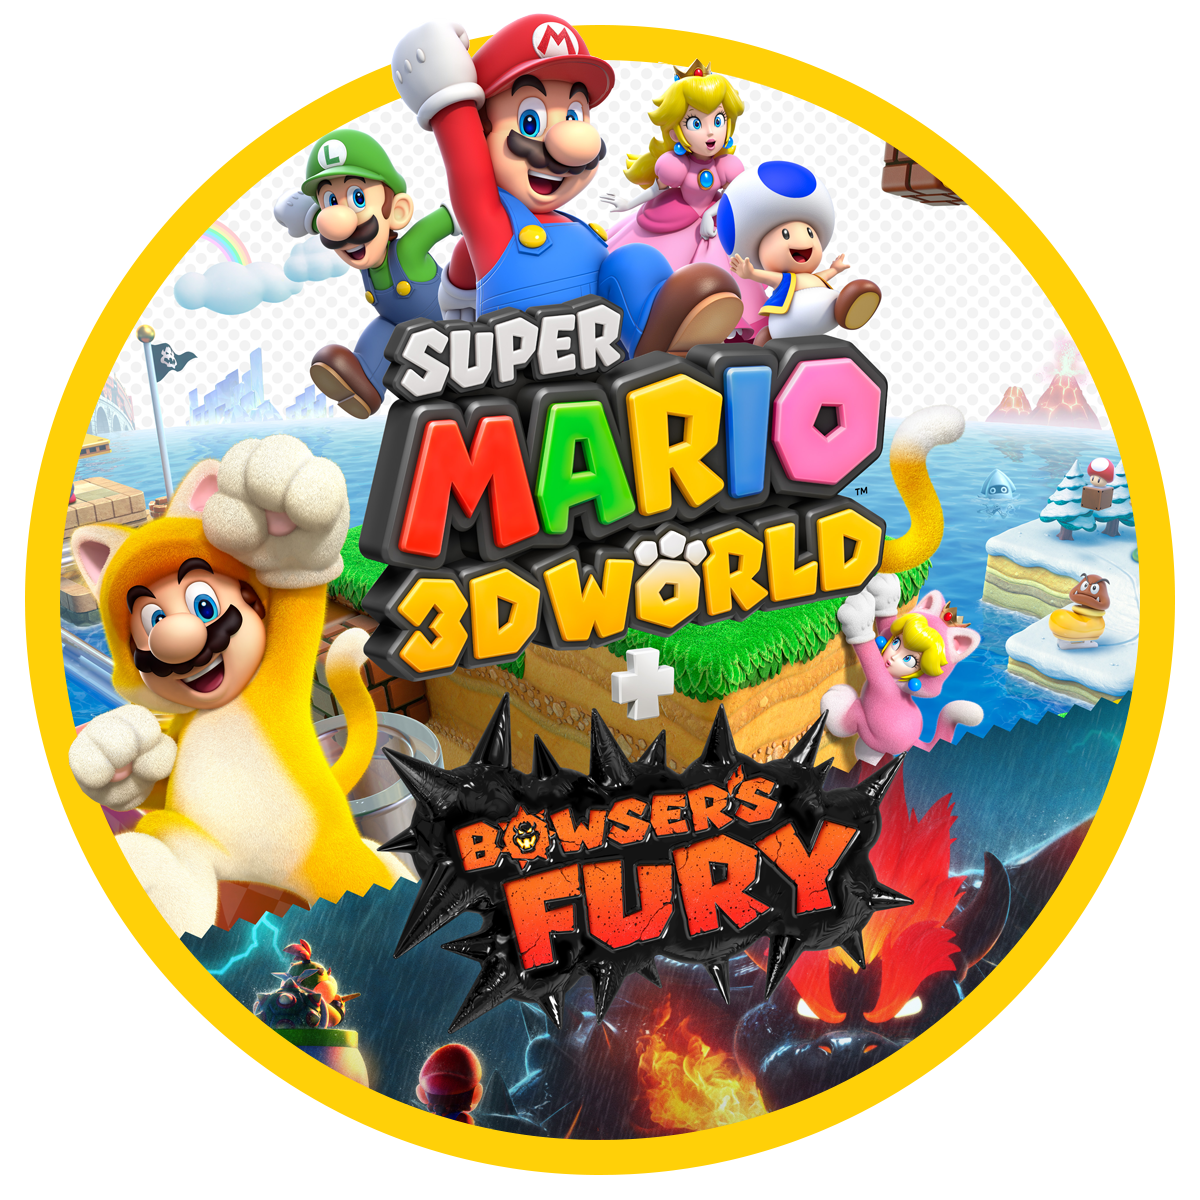 Super Mario 3D World features online play in its Nintendo Switch release